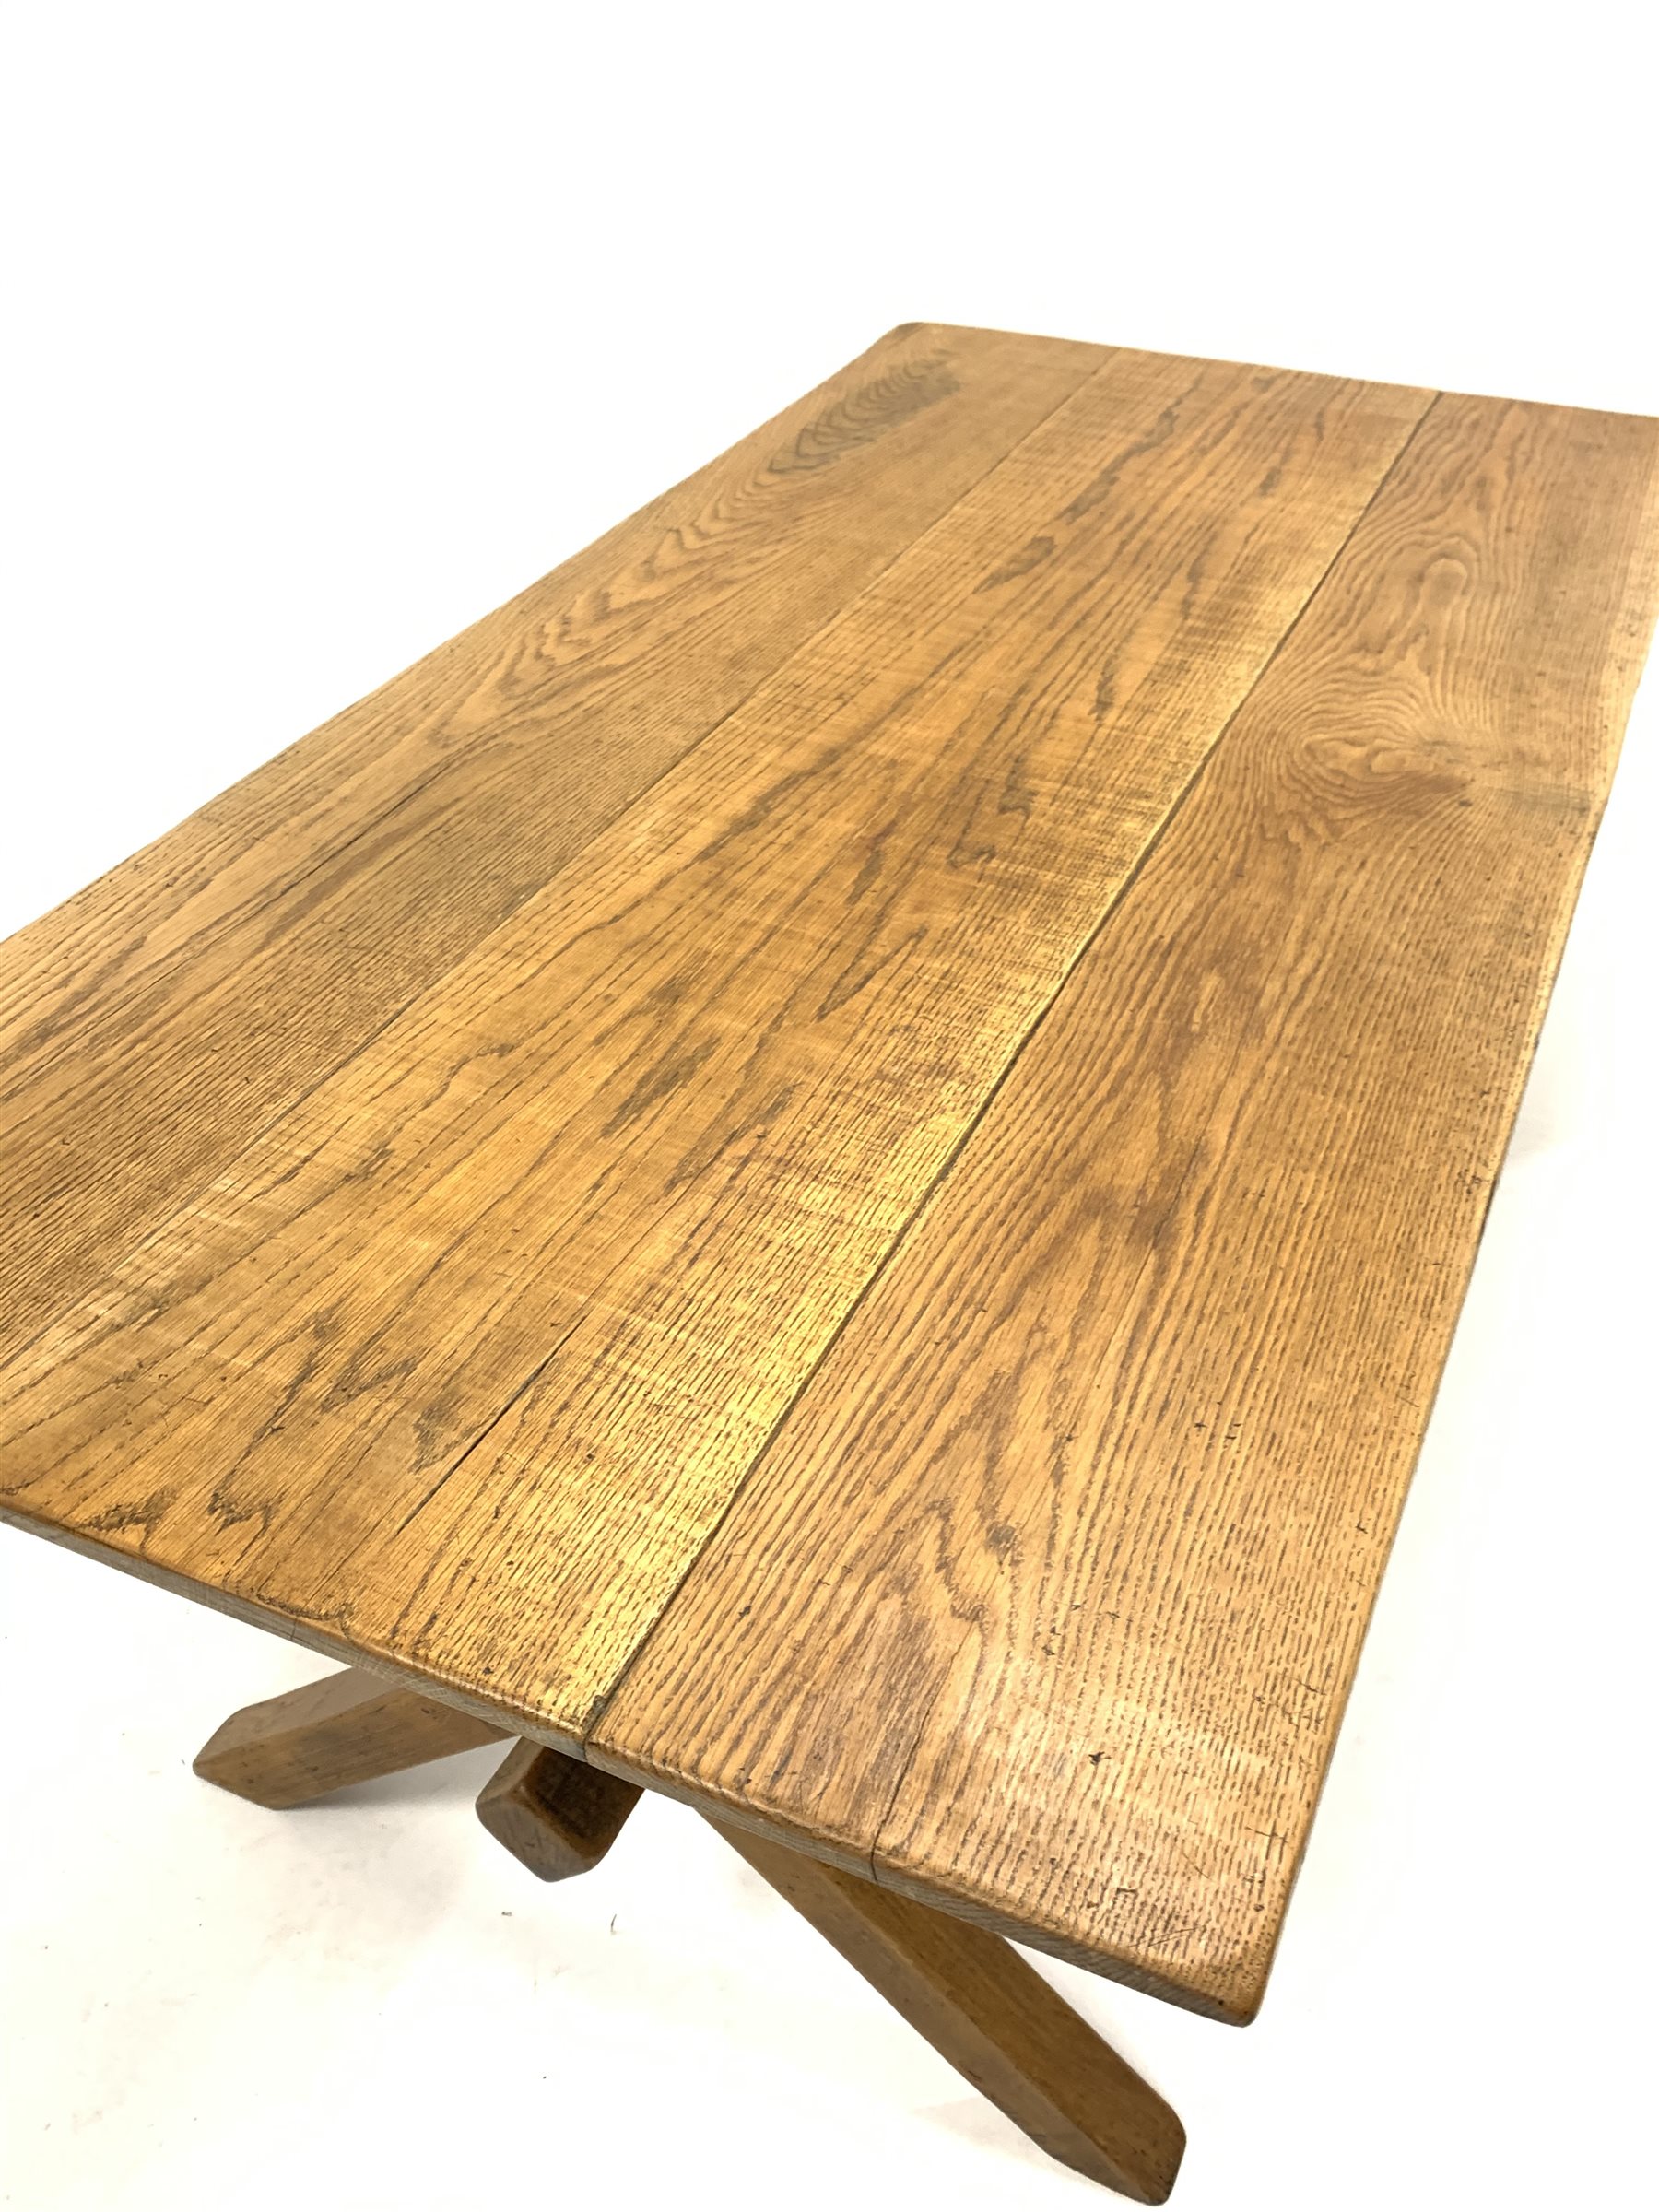 Early 20th century oak refectory style dining table, with rectangular top raised on 'X' supports uni - Image 4 of 4